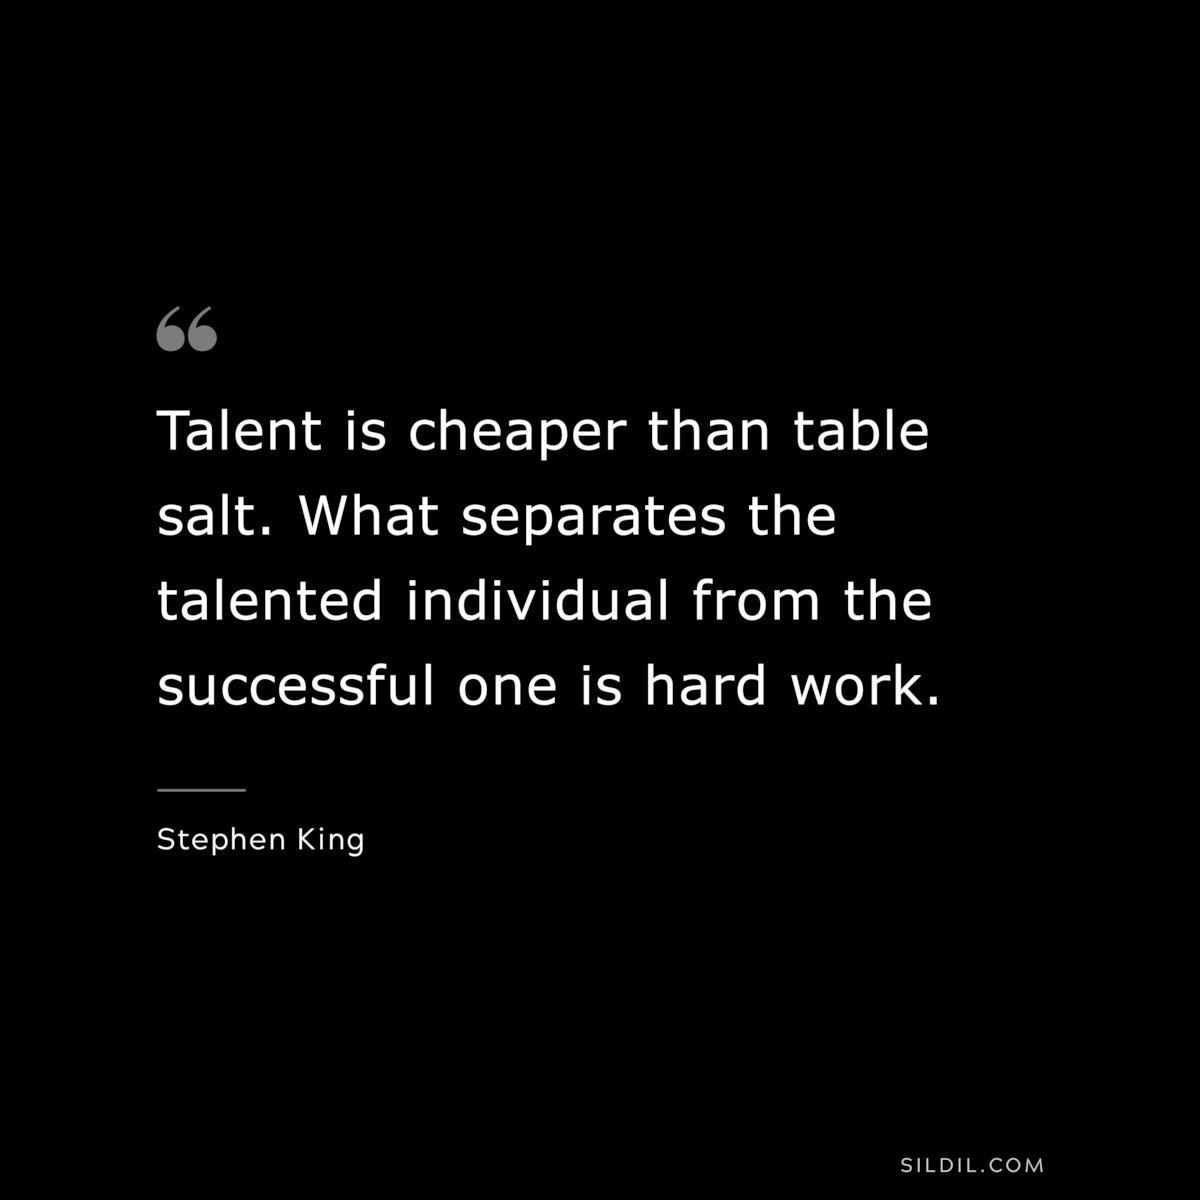 Talent is cheaper than table salt. What separates the talented individual from the successful one is hard work. ― Stephen King